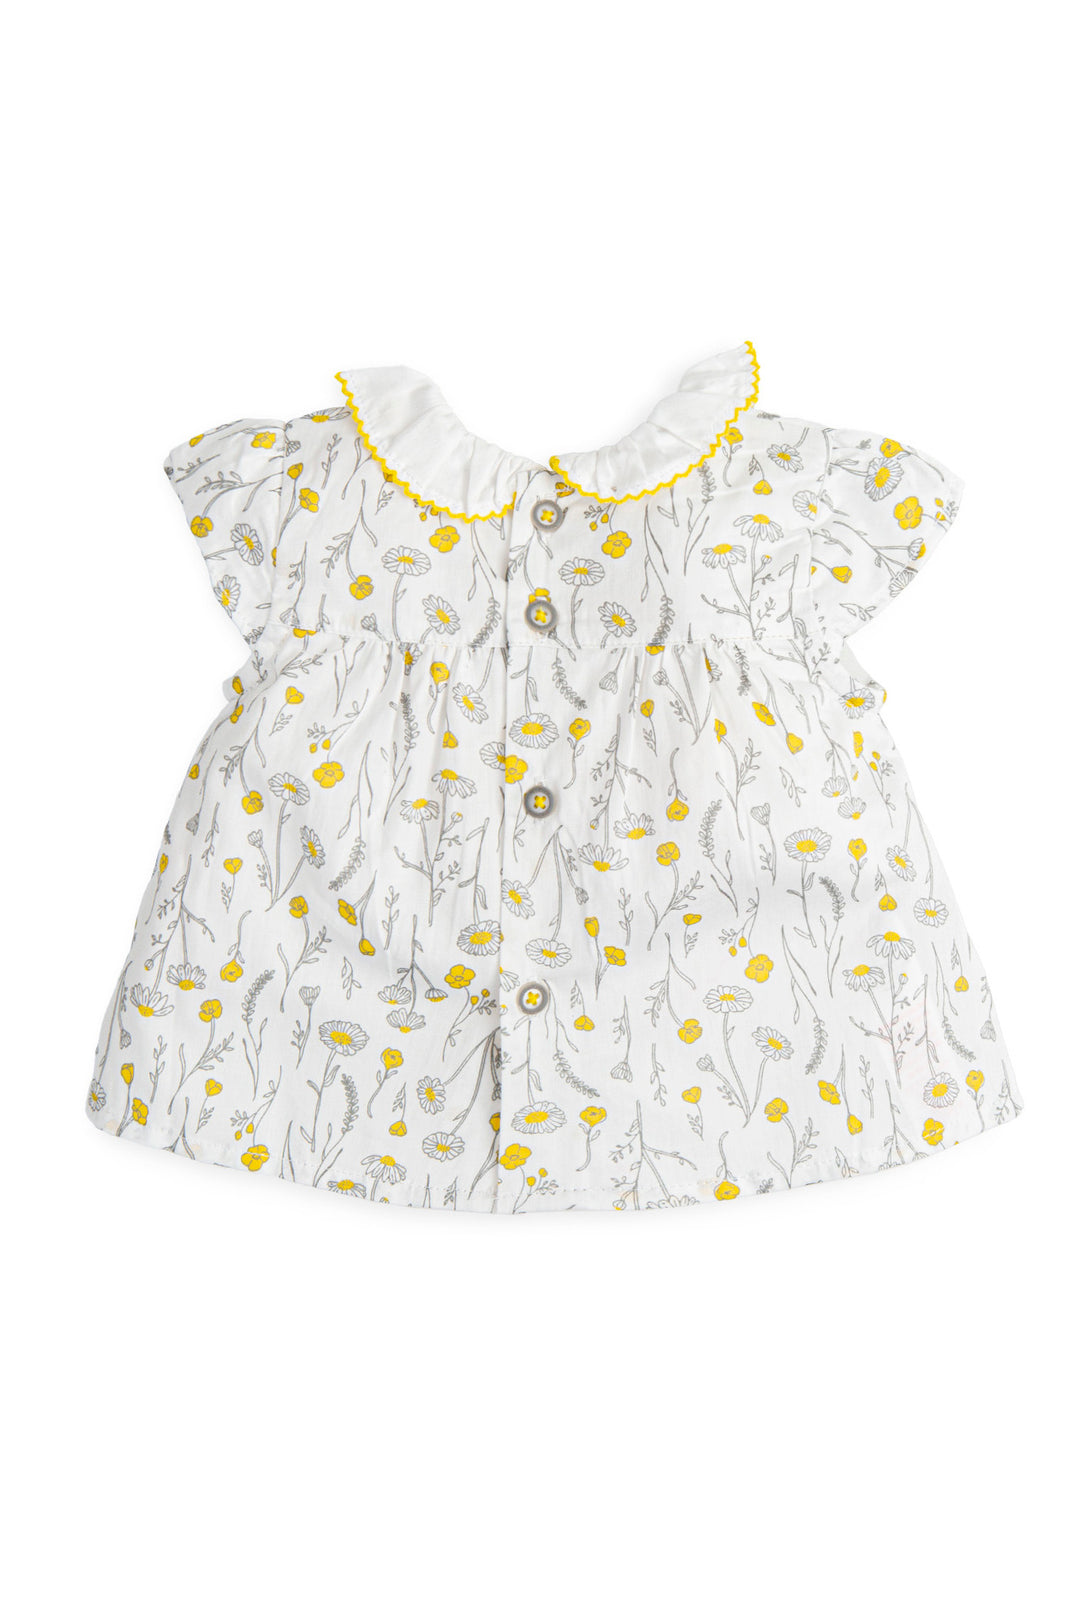 Tutto Piccolo "Melia" Yellow Floral Blouse & Knit Bloomers | Millie and John